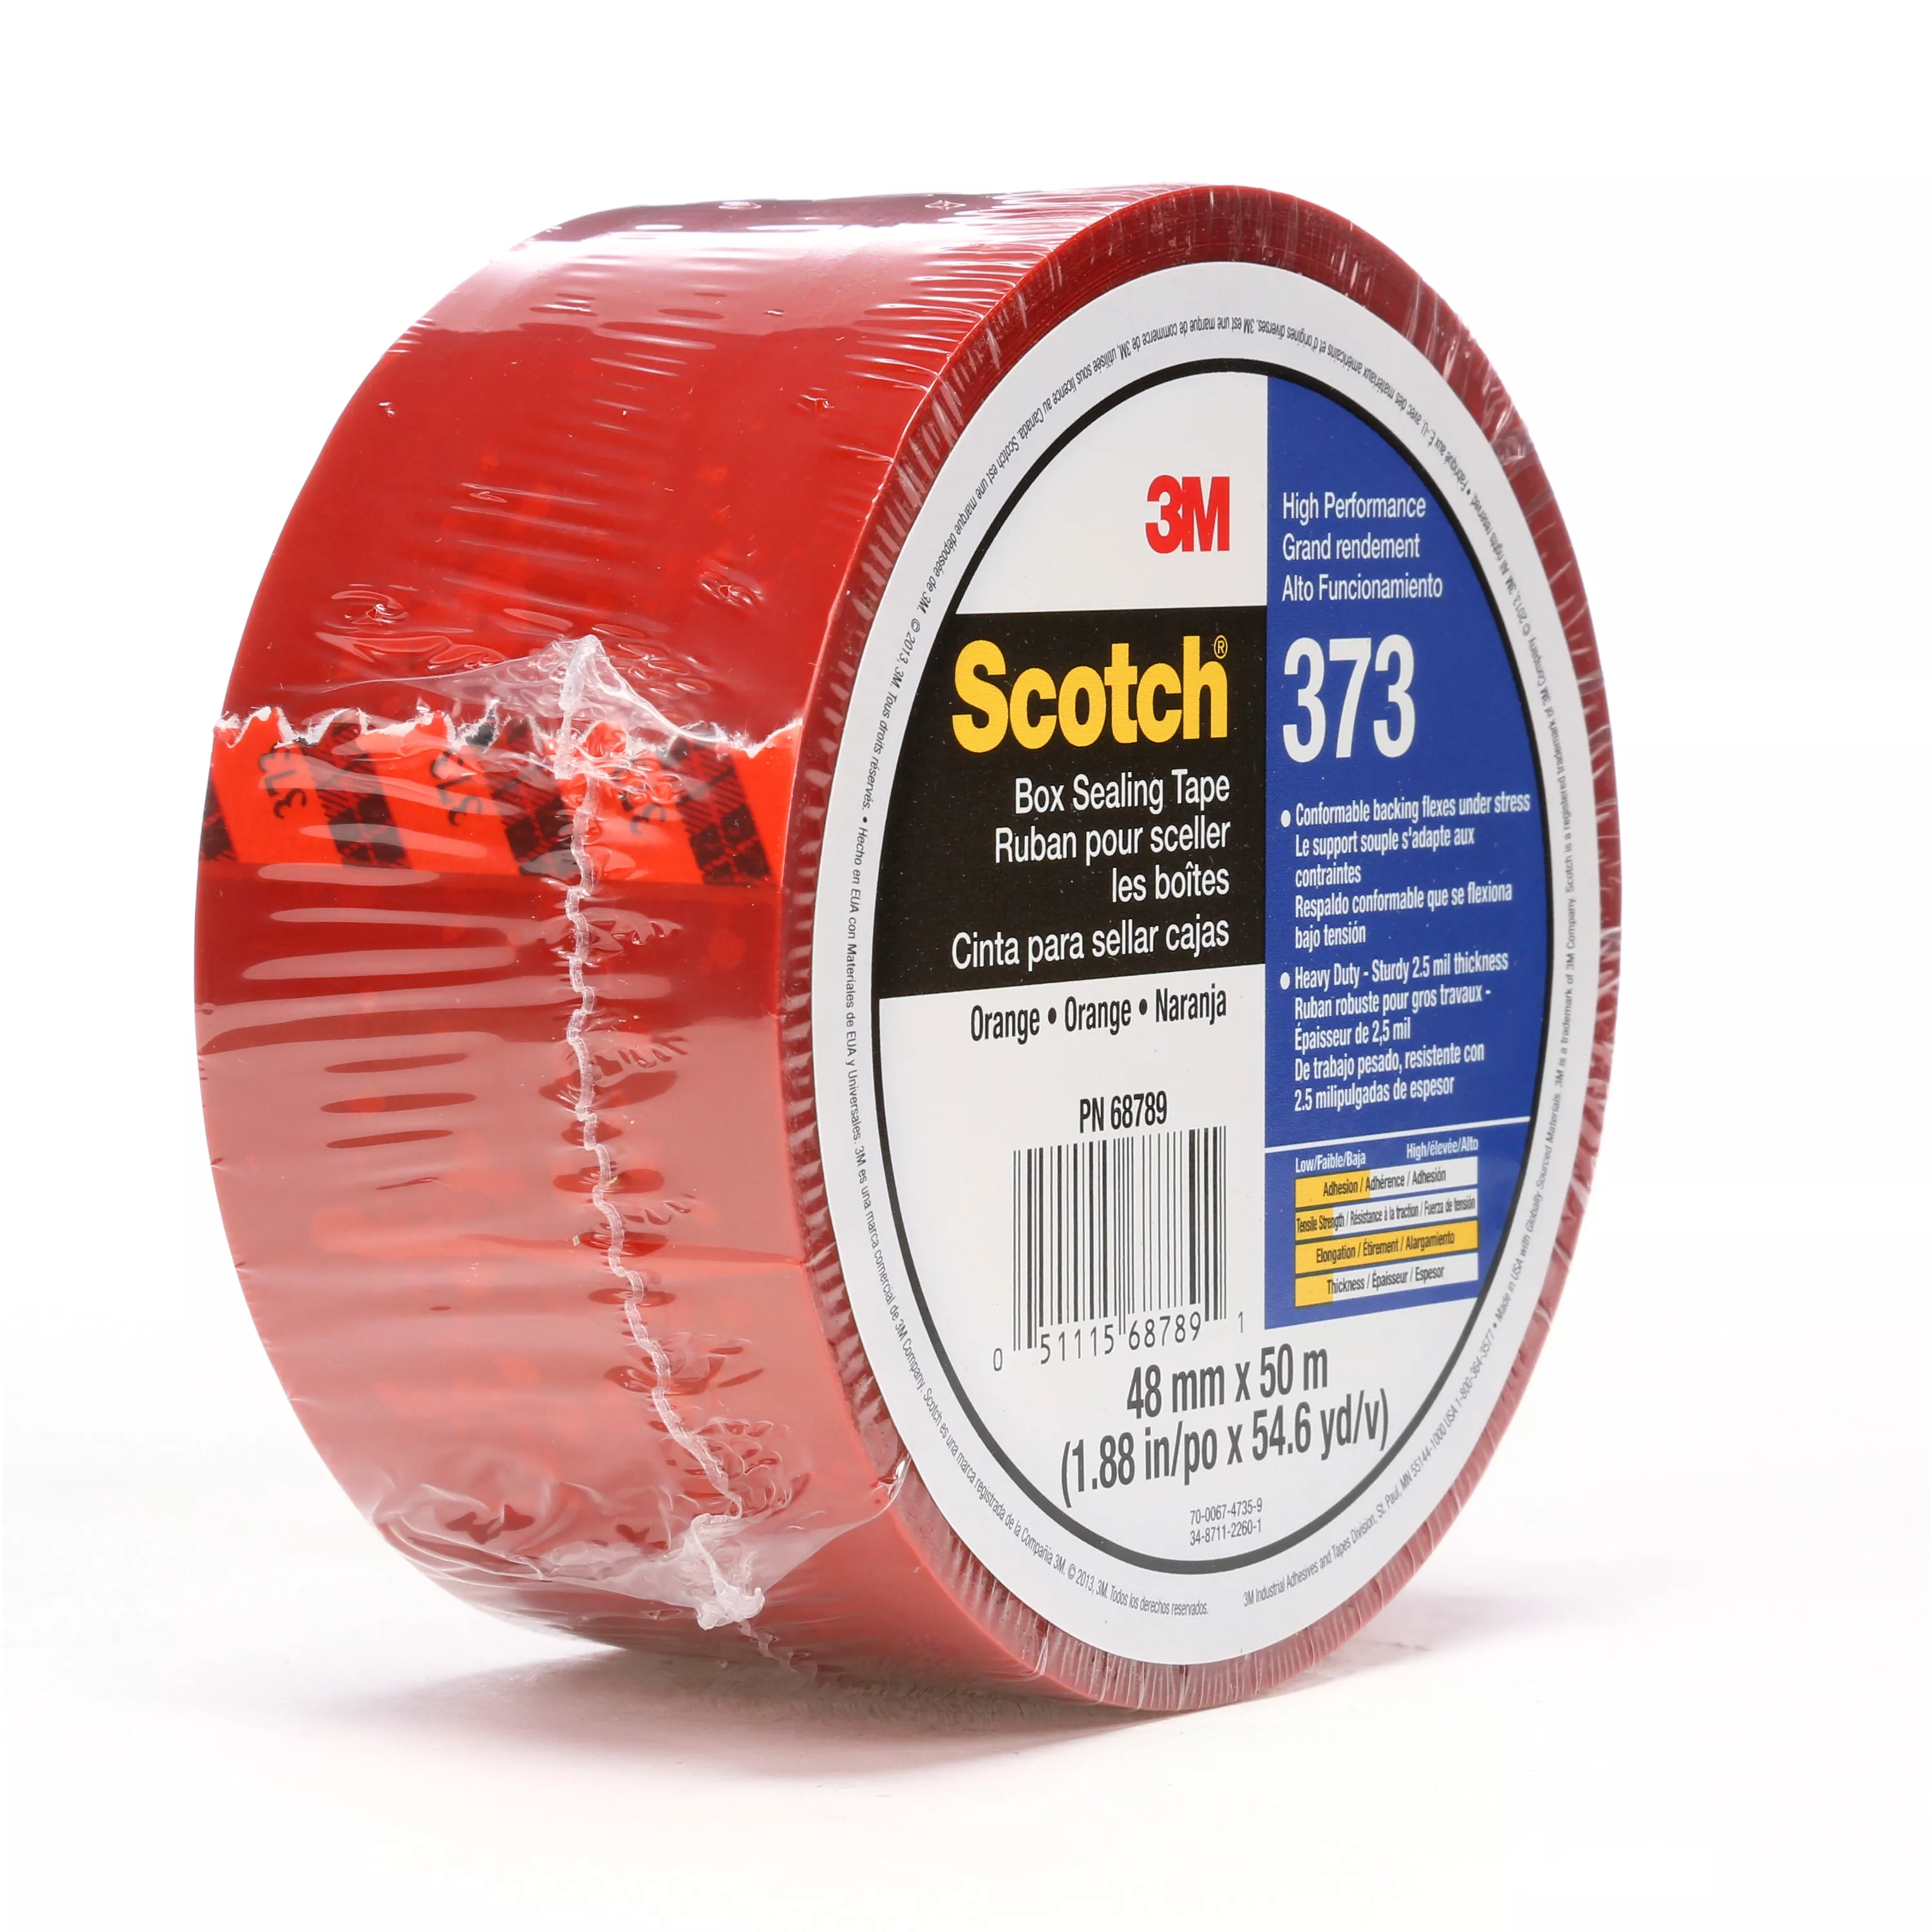 Scotch® Box Sealing Tape 373, Orange, 48 mm x 50 m, 36/Case,
Individually Wrapped Conveniently Packaged